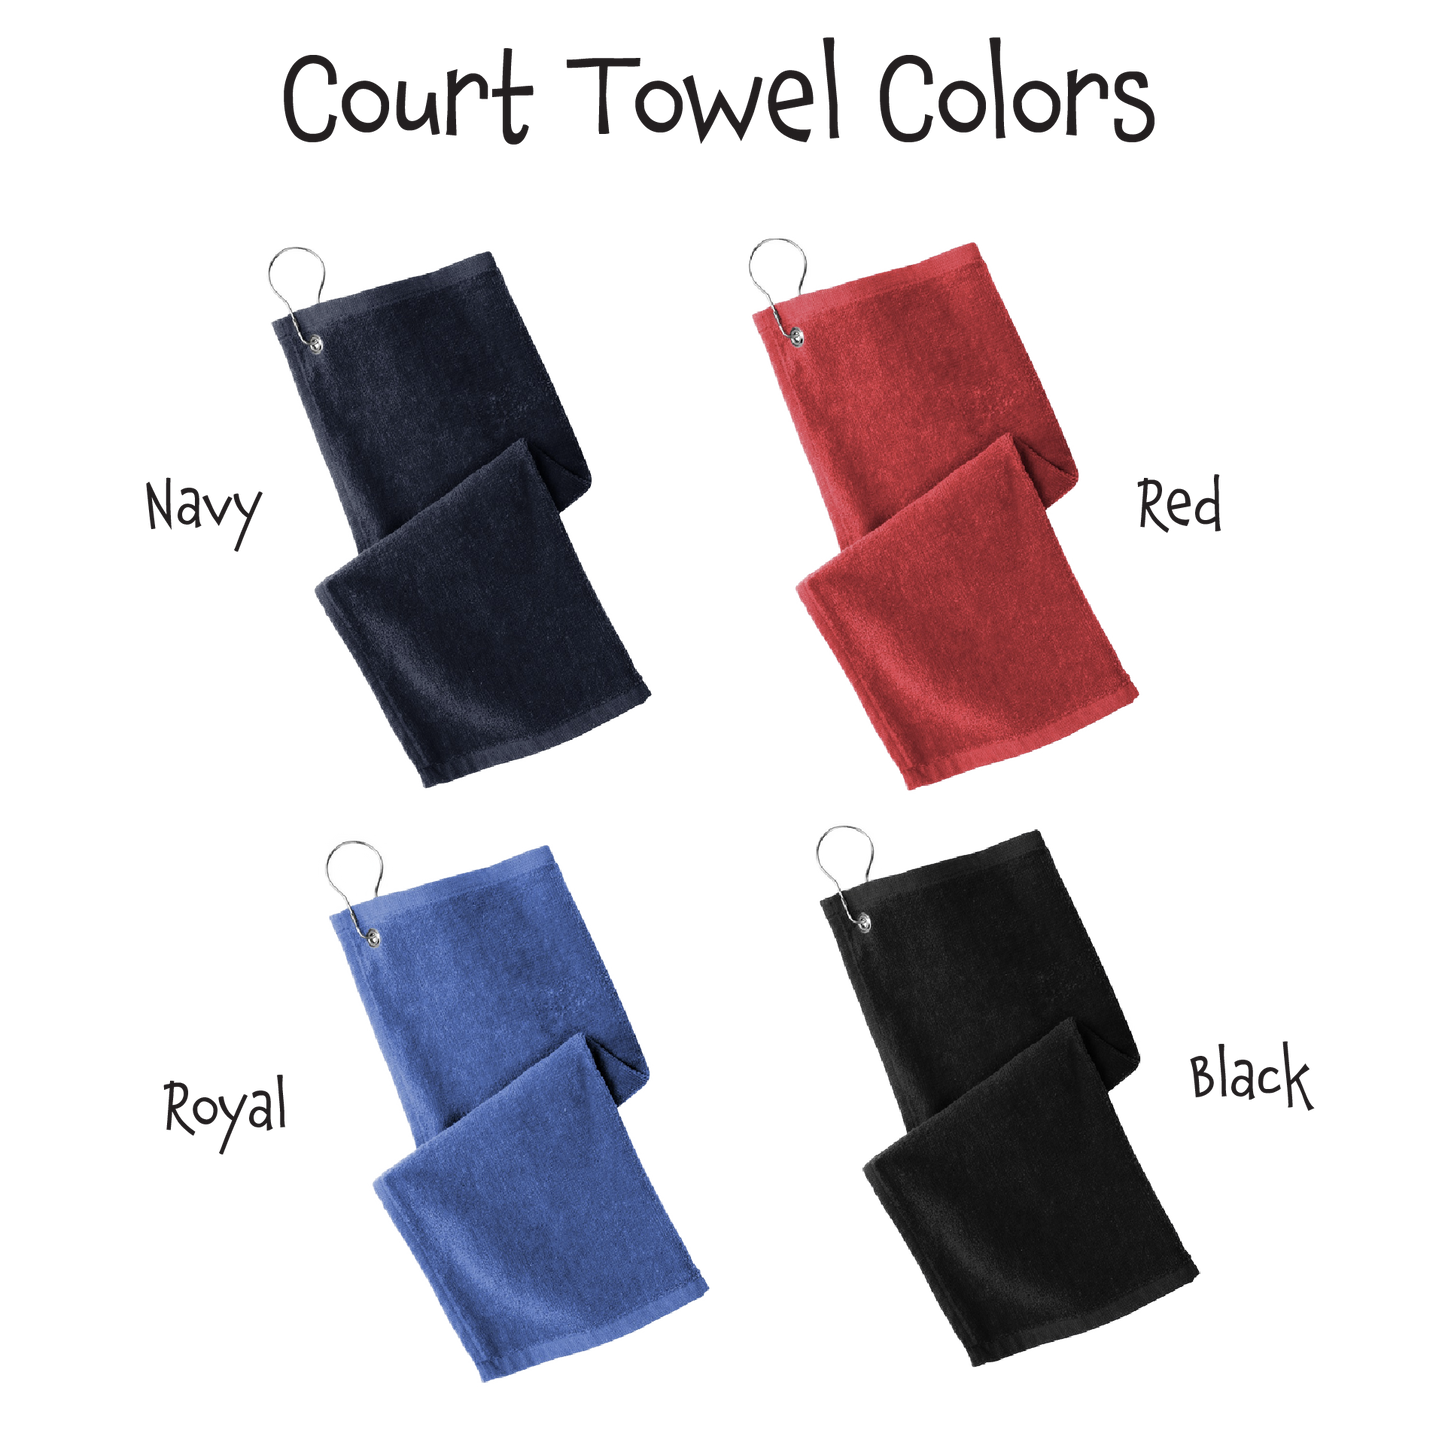 For The Love Of Pickleball | Pickleball Court Towels | Grommeted 100% Cotton Terry Velour